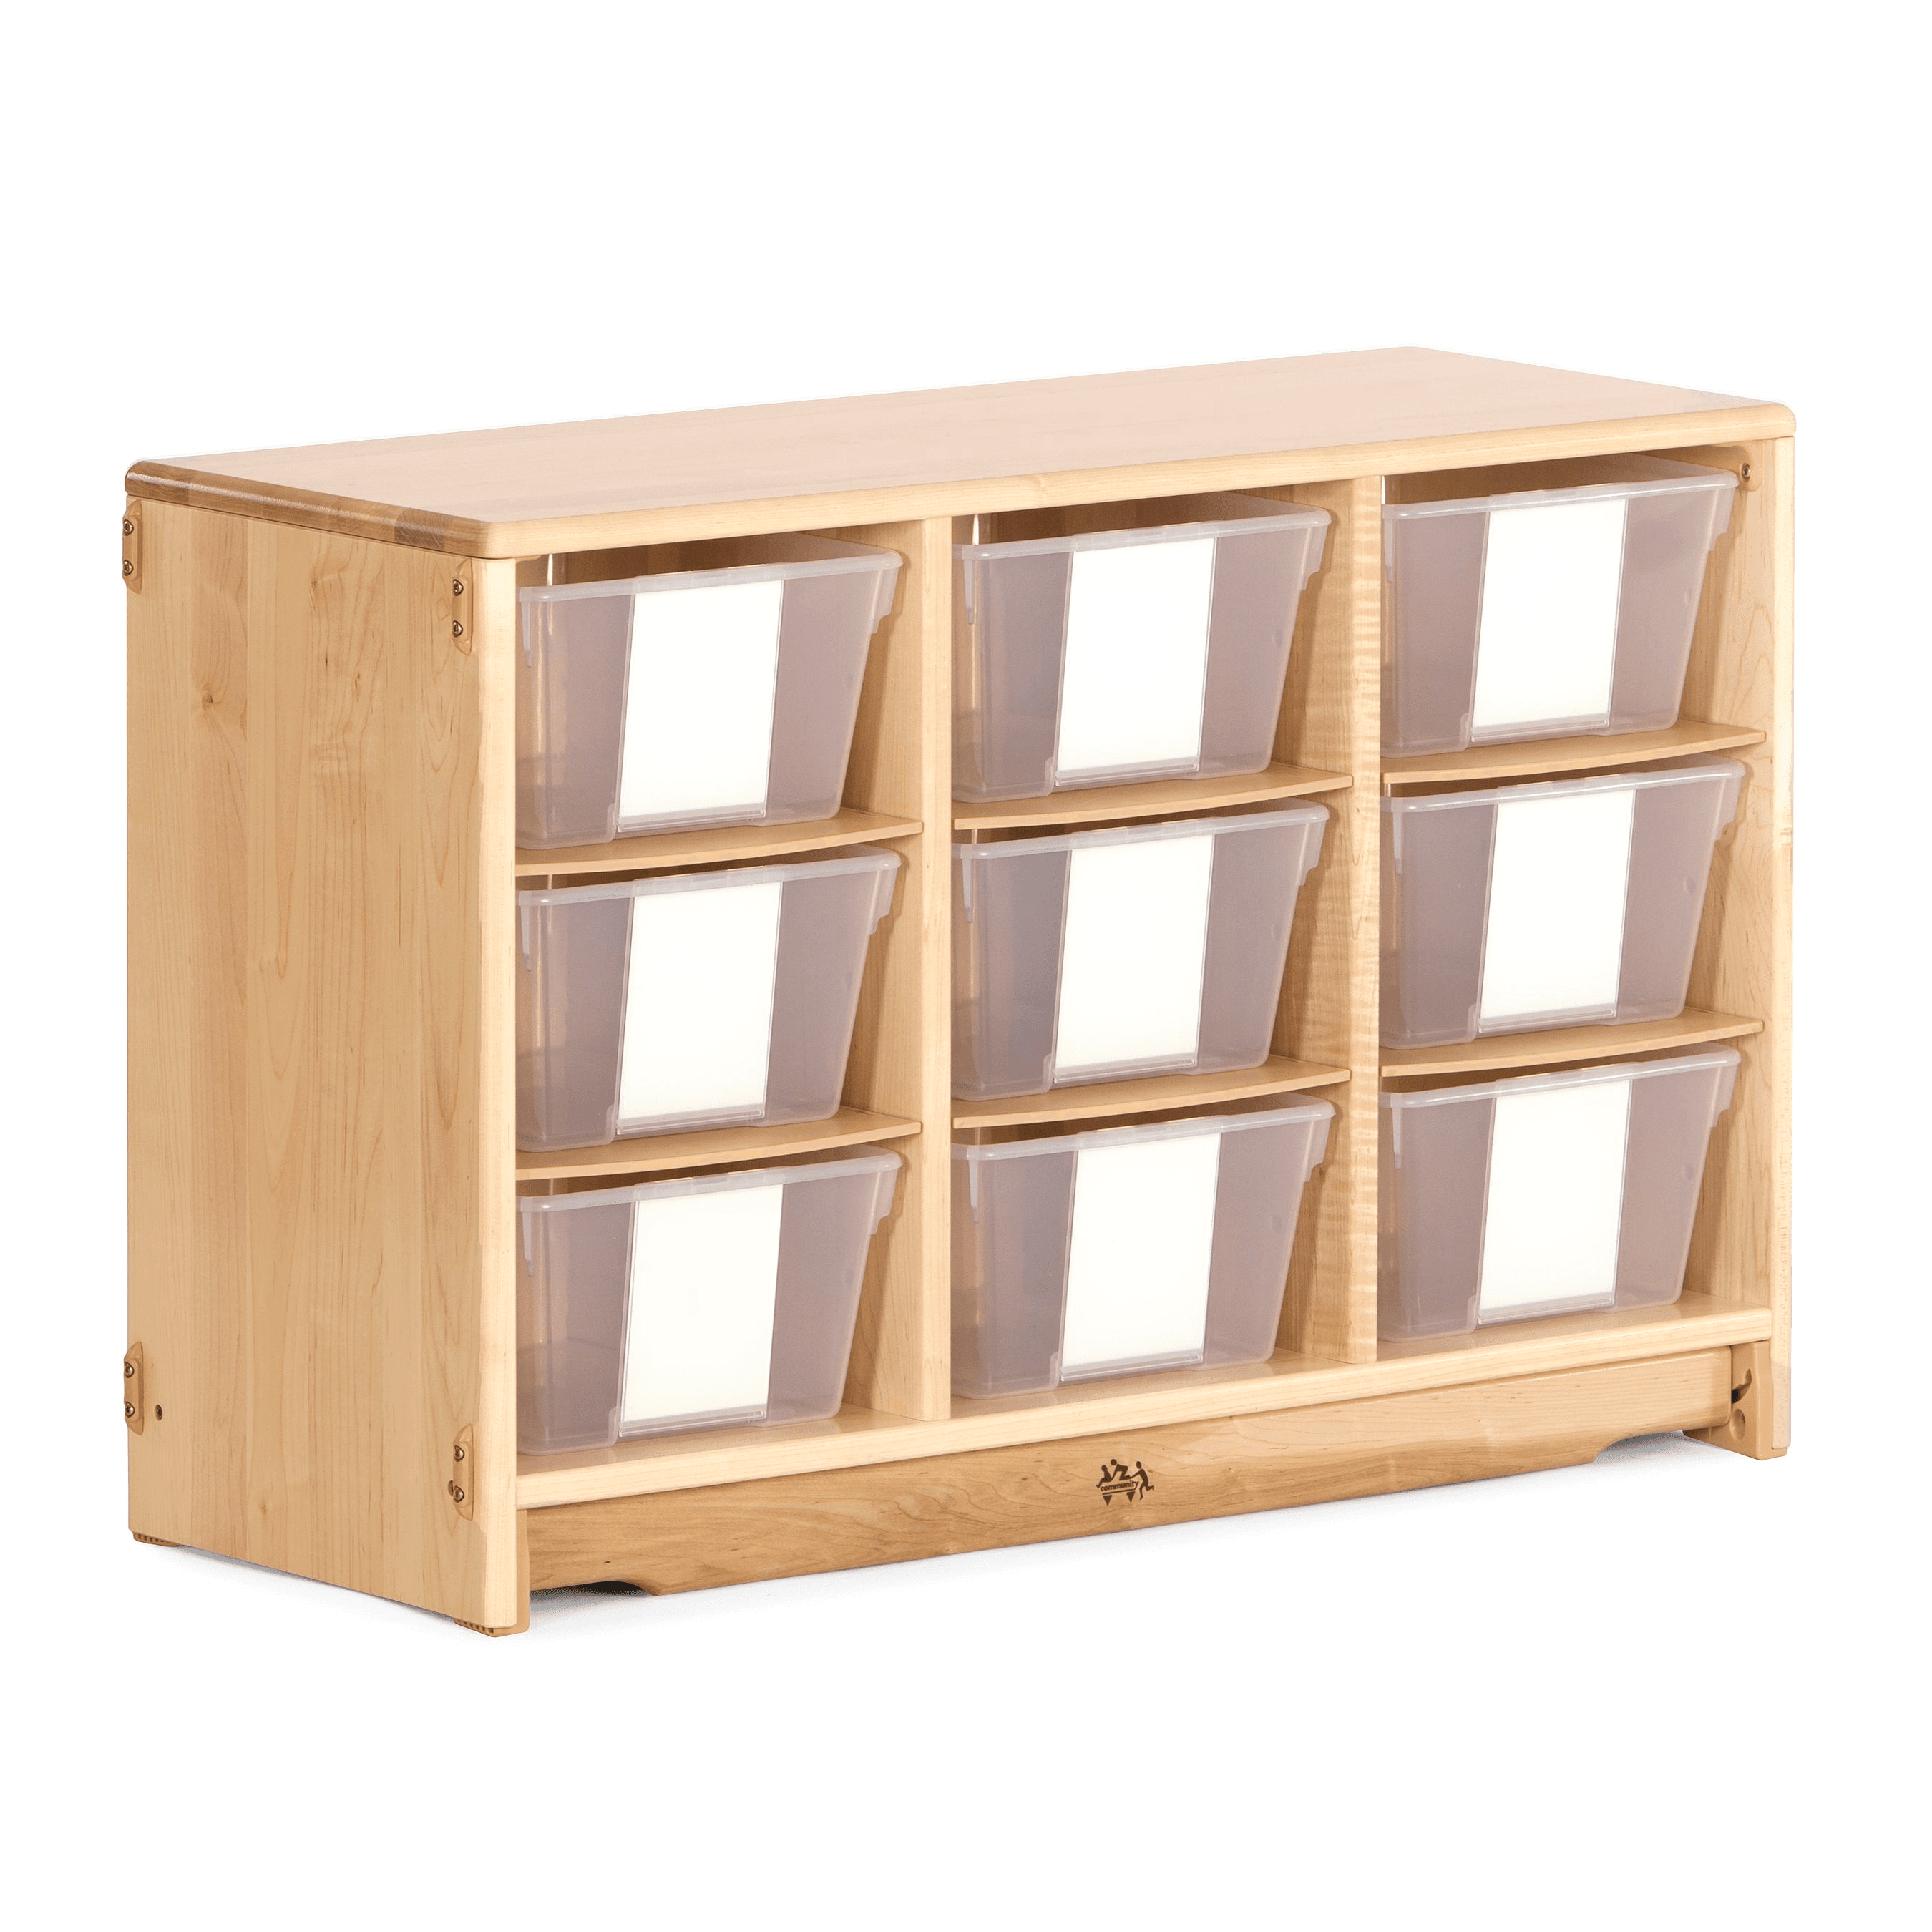 Montessori Community Playthings Tote Shelf With Totes 3 x 24 Inches